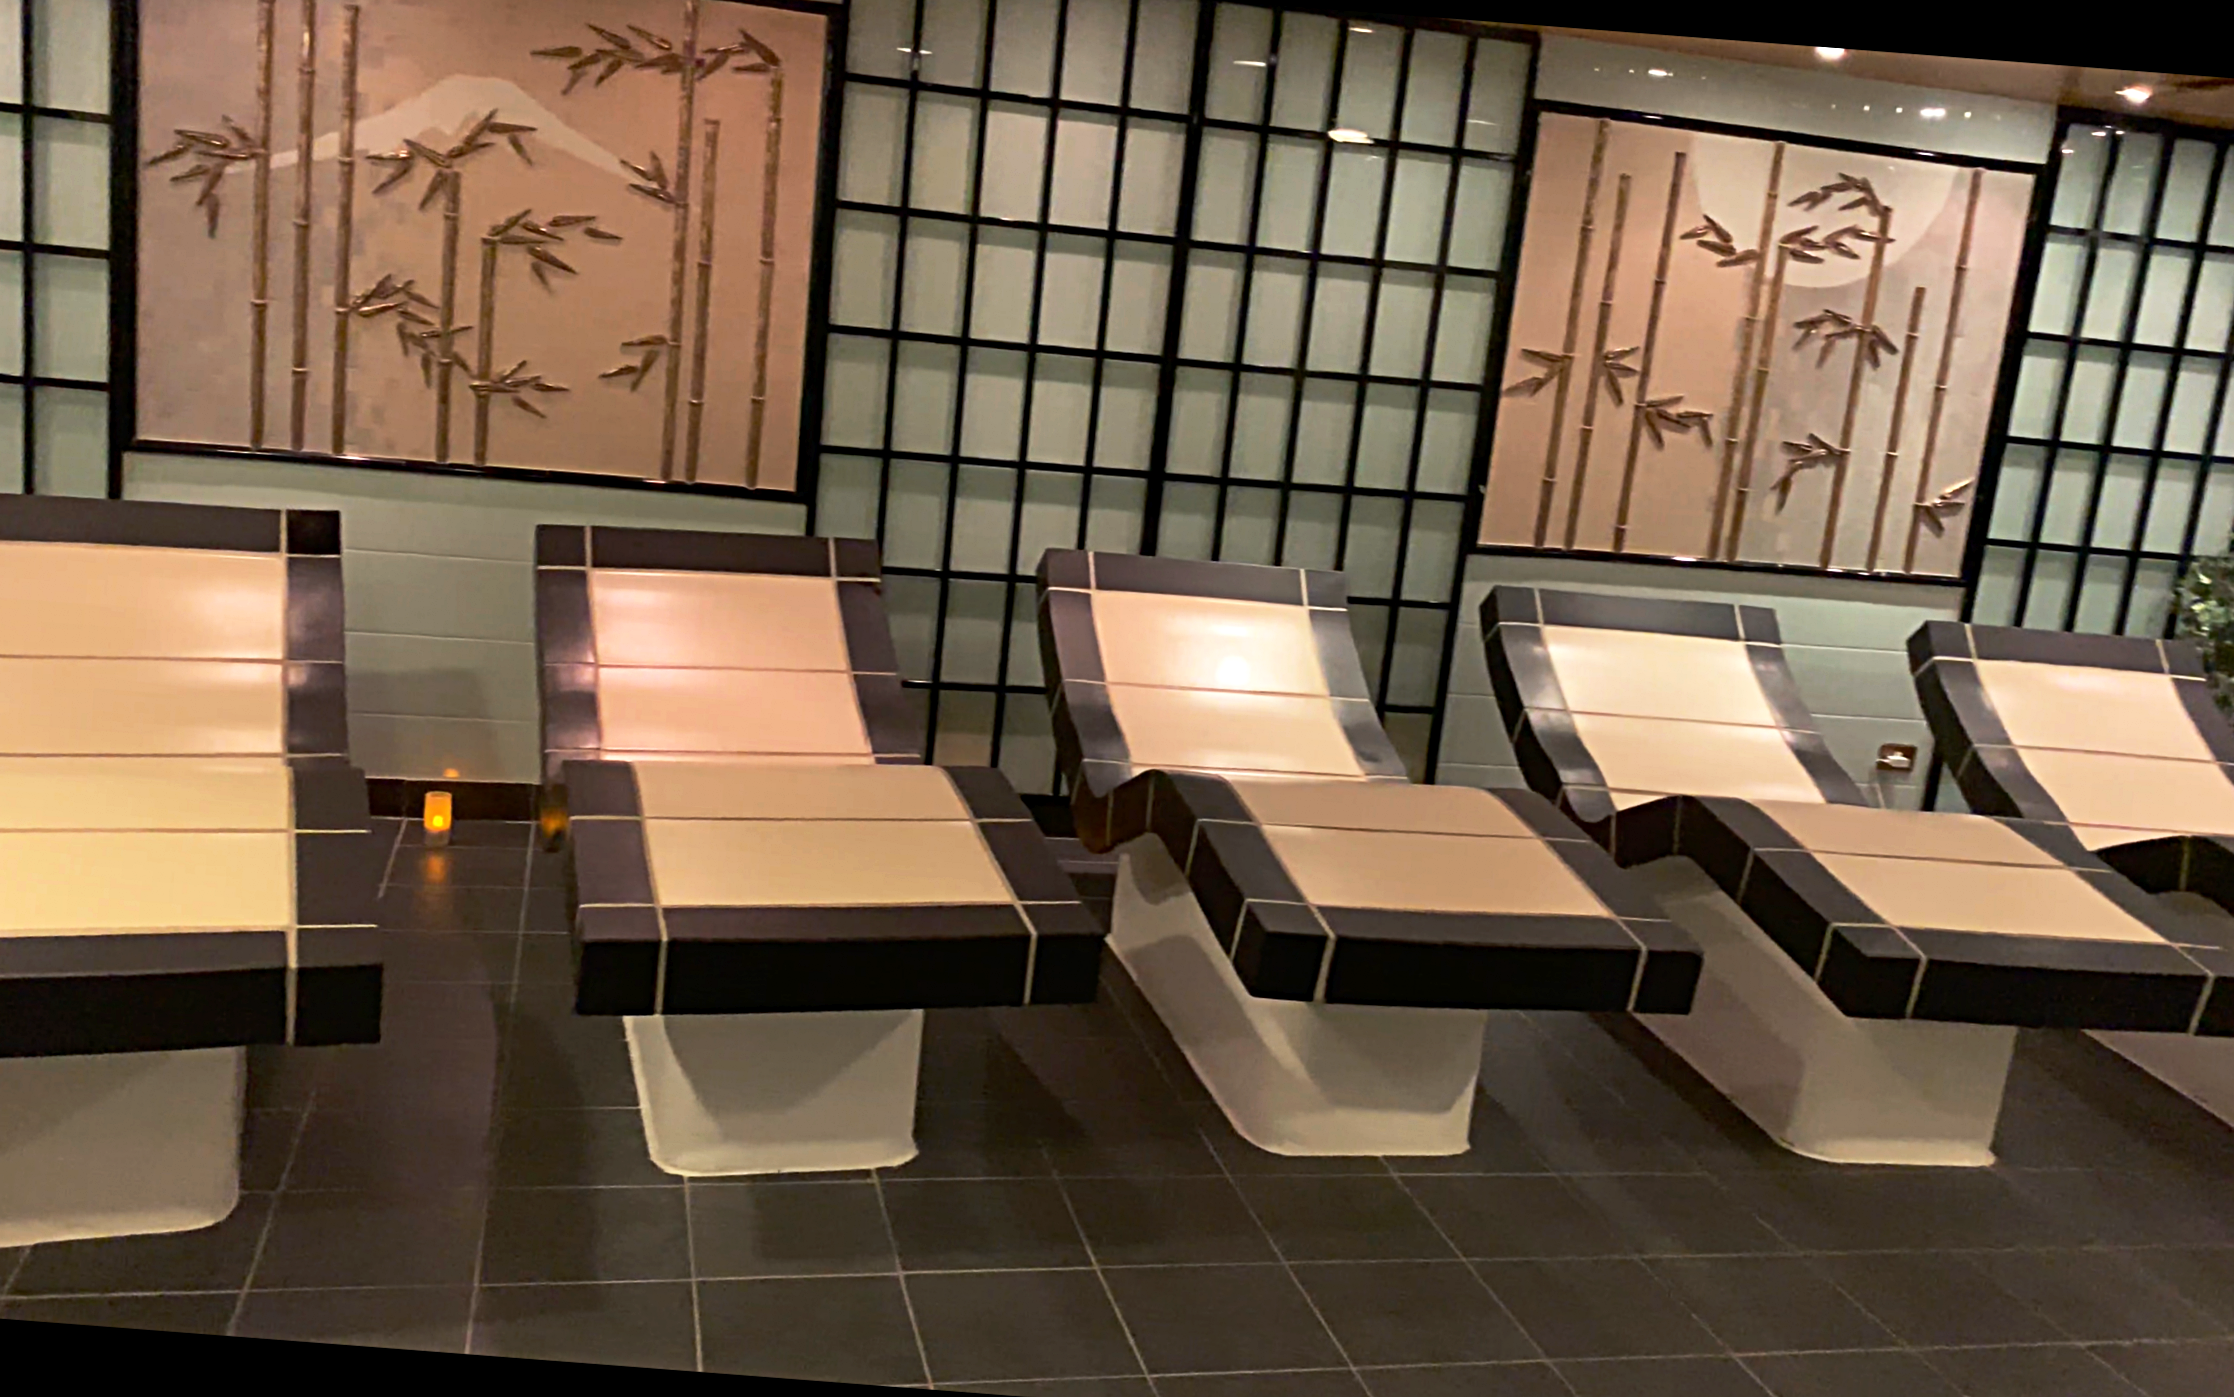  Heated beds in the inside spa area.  